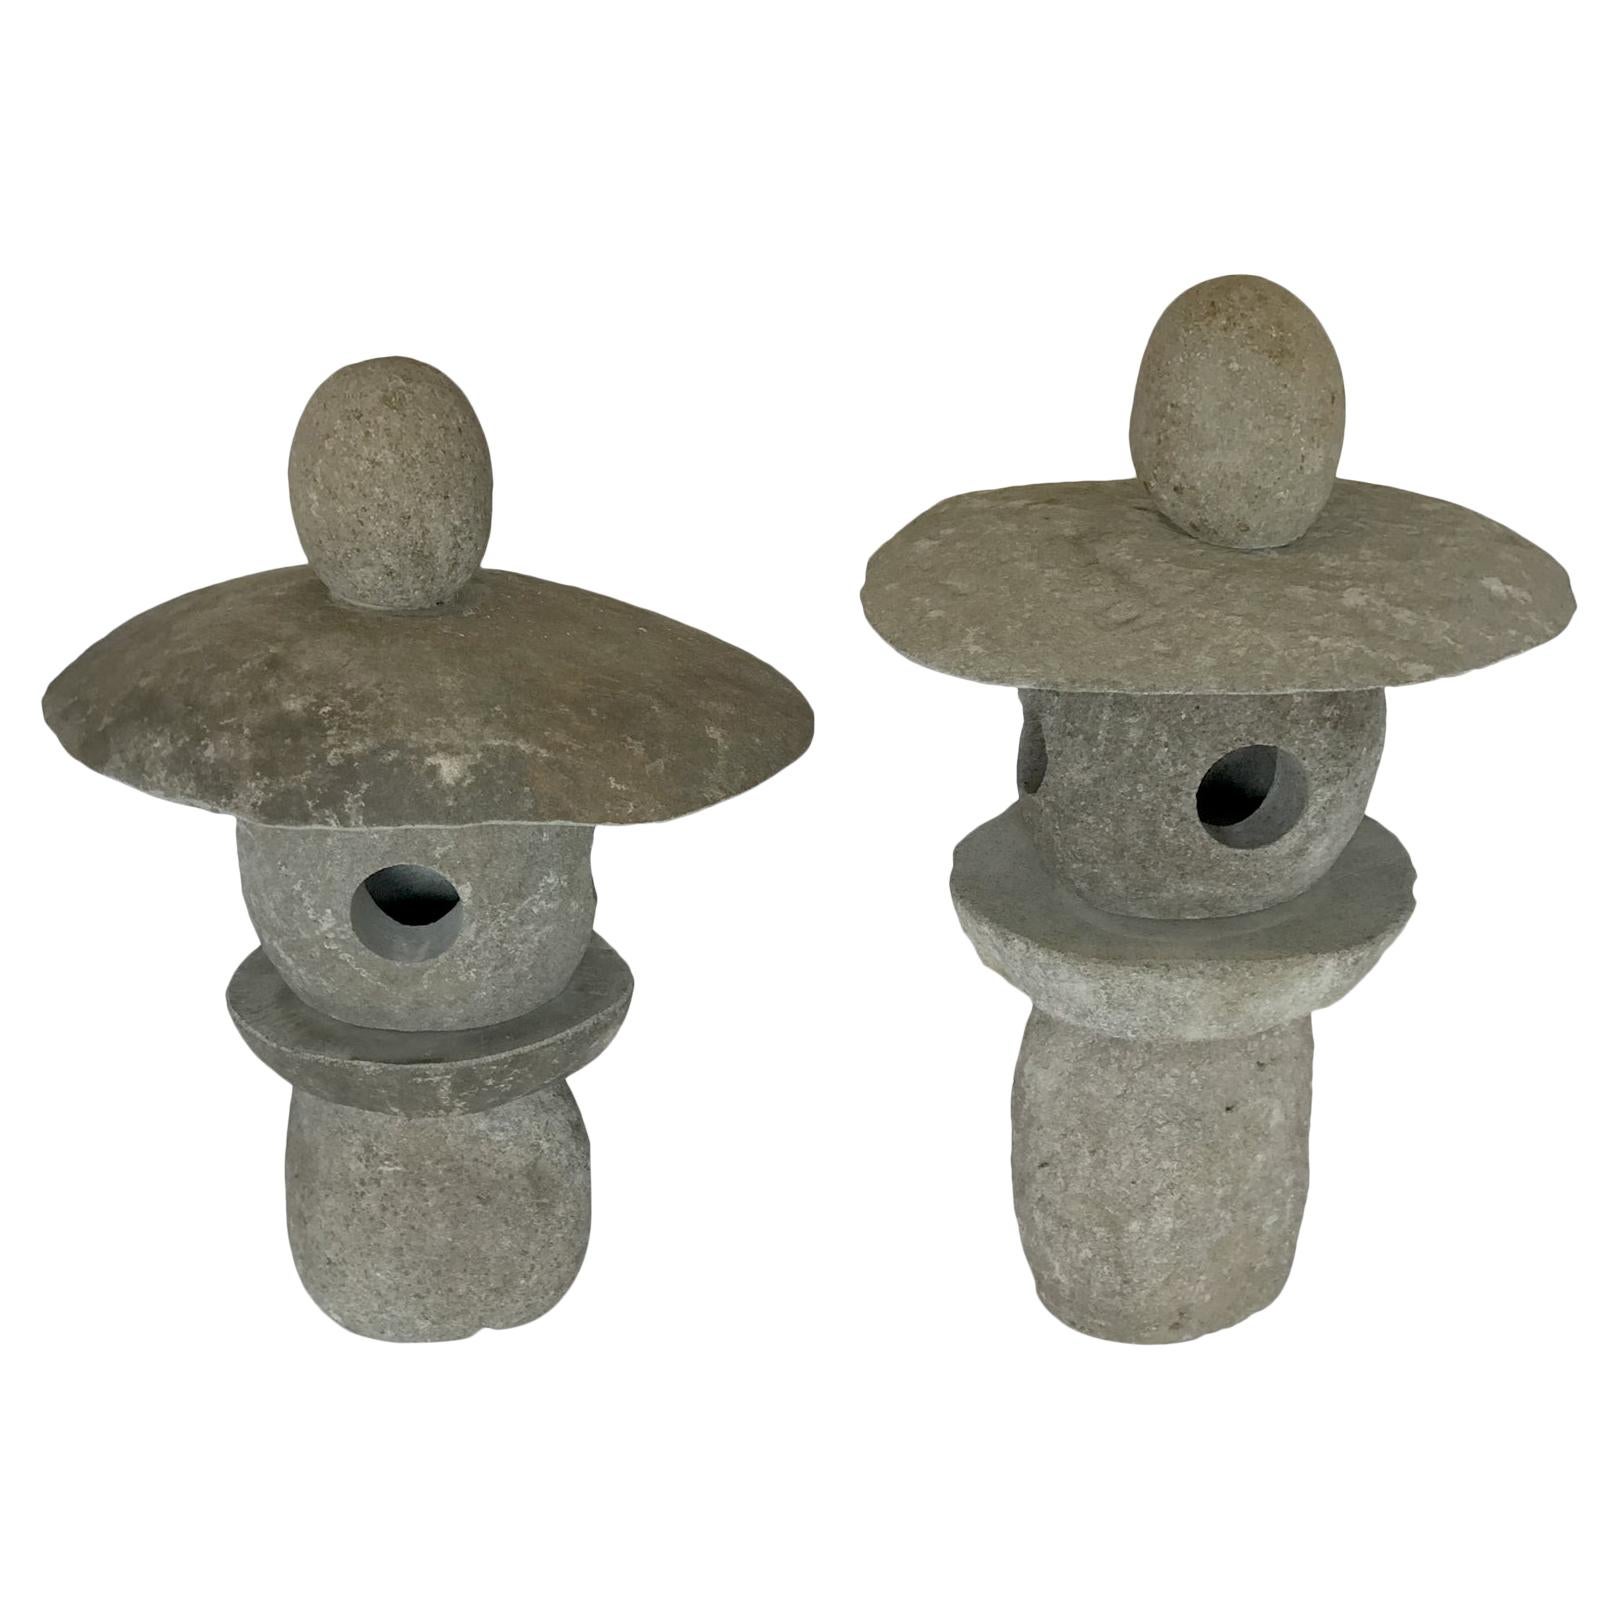 Chinese Stone Lantern - Right one available